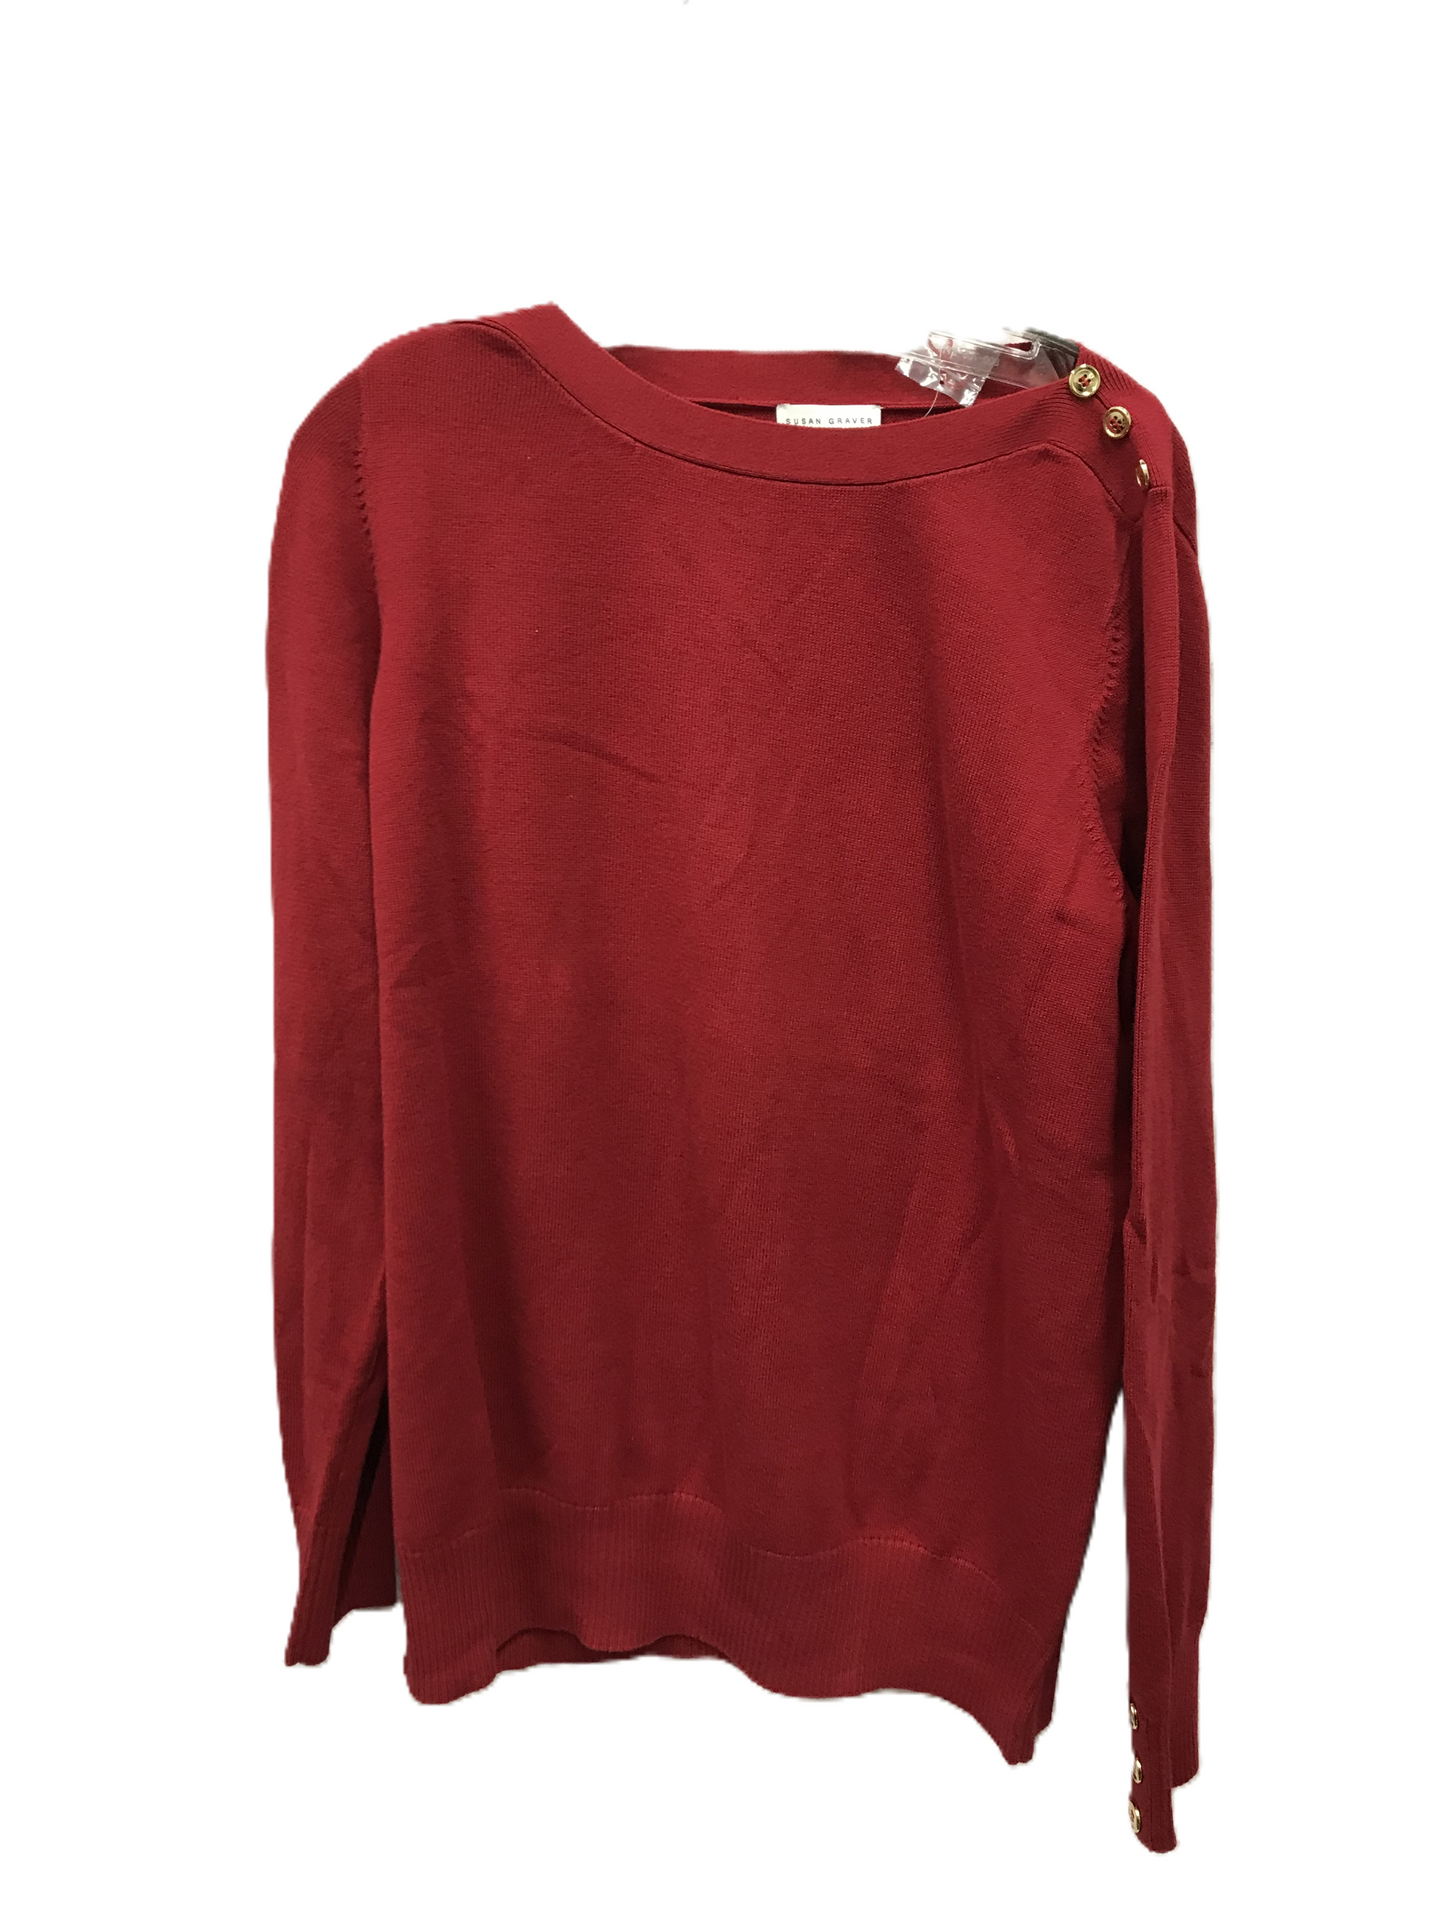 Red Sweater By Susan Graver, Size: L